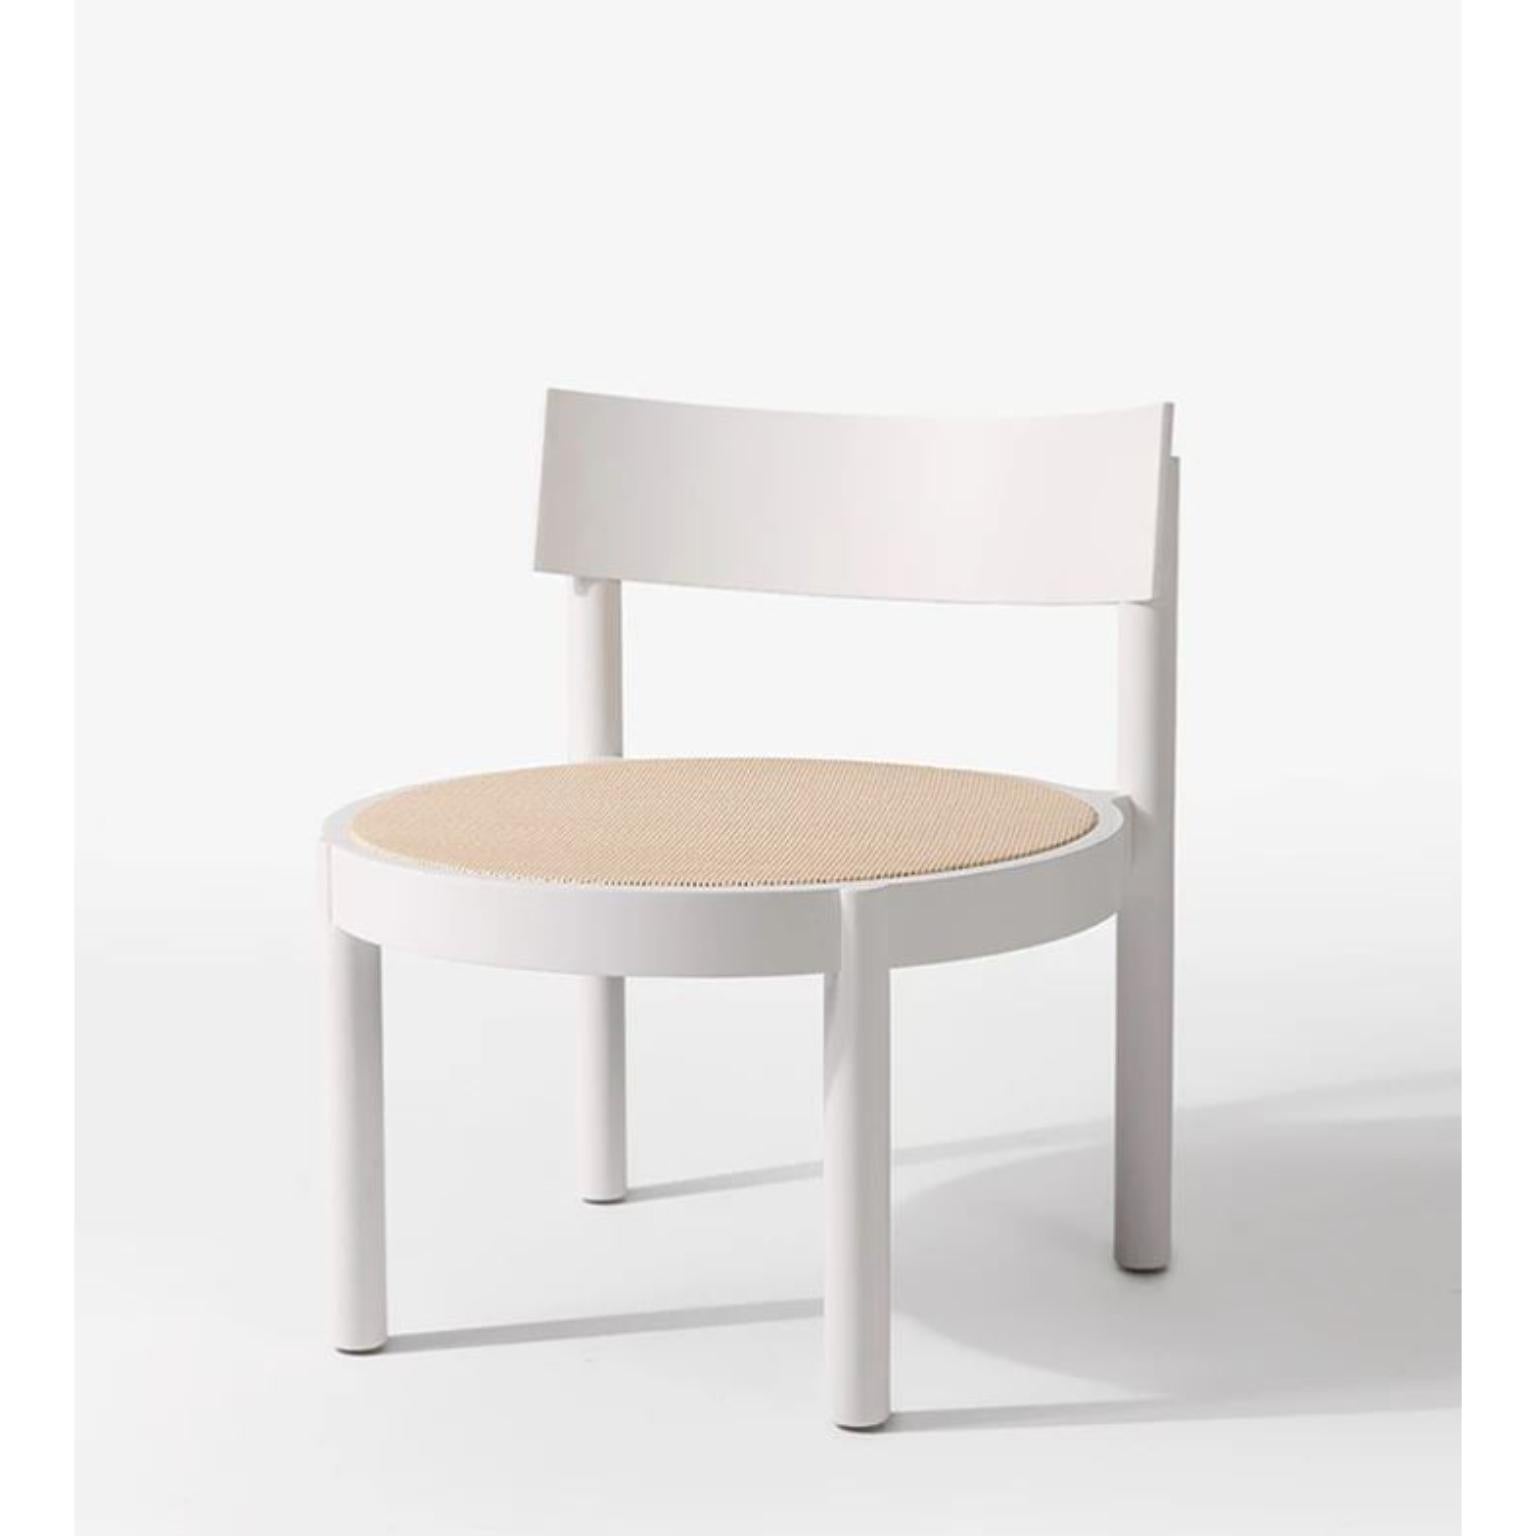 White Gravatá Lounge Chair by Wentz
Dimensions: D 64 x W 60 x H 67 cm
Materials: Tauari Wood, Cane/Upholstery.
Weight: 6,6kg / 14,5 lbs

The Gravatá series synthesizes our vision regarding the functional and visual simplicity of furniture. Through